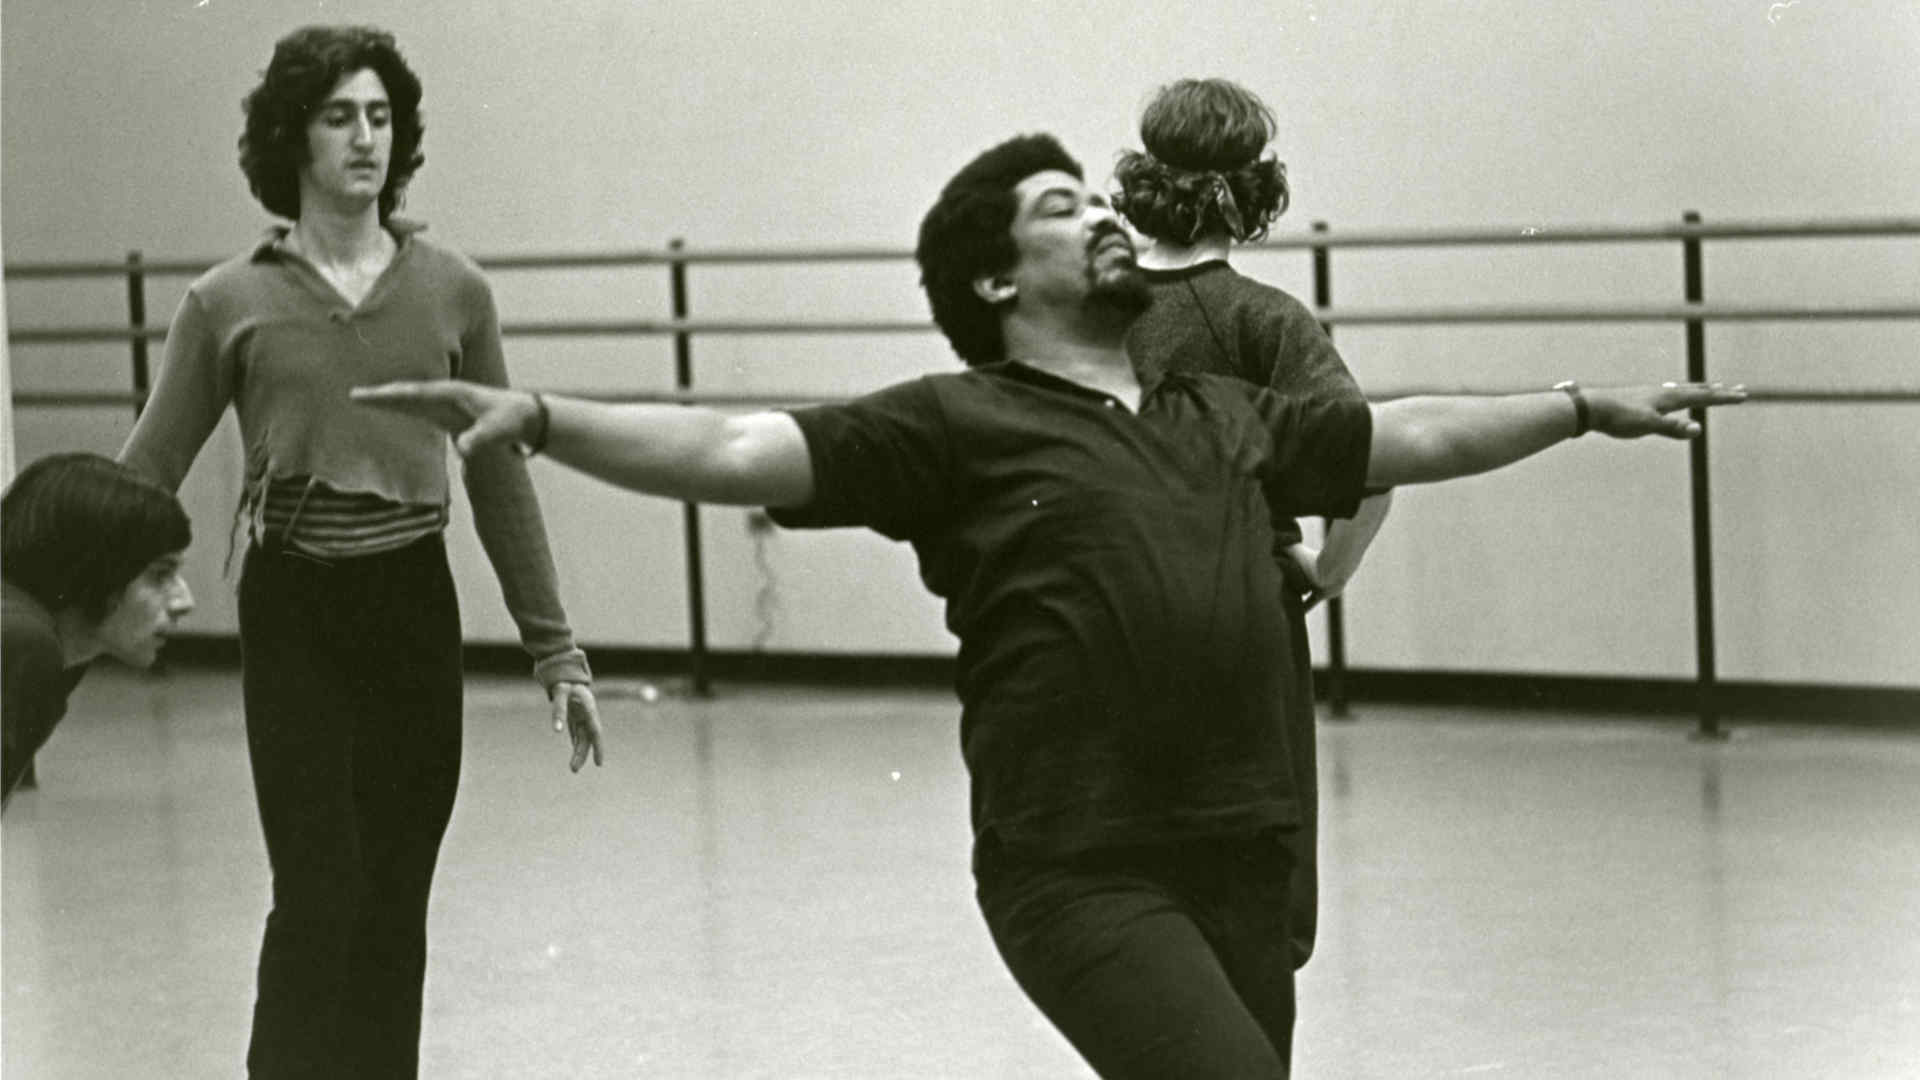 Archival (black and white) photo of a dance rehearsal in a studio, ballet barre visible in the background, and the photo features Gregory Mitchell, a Juilliard alum